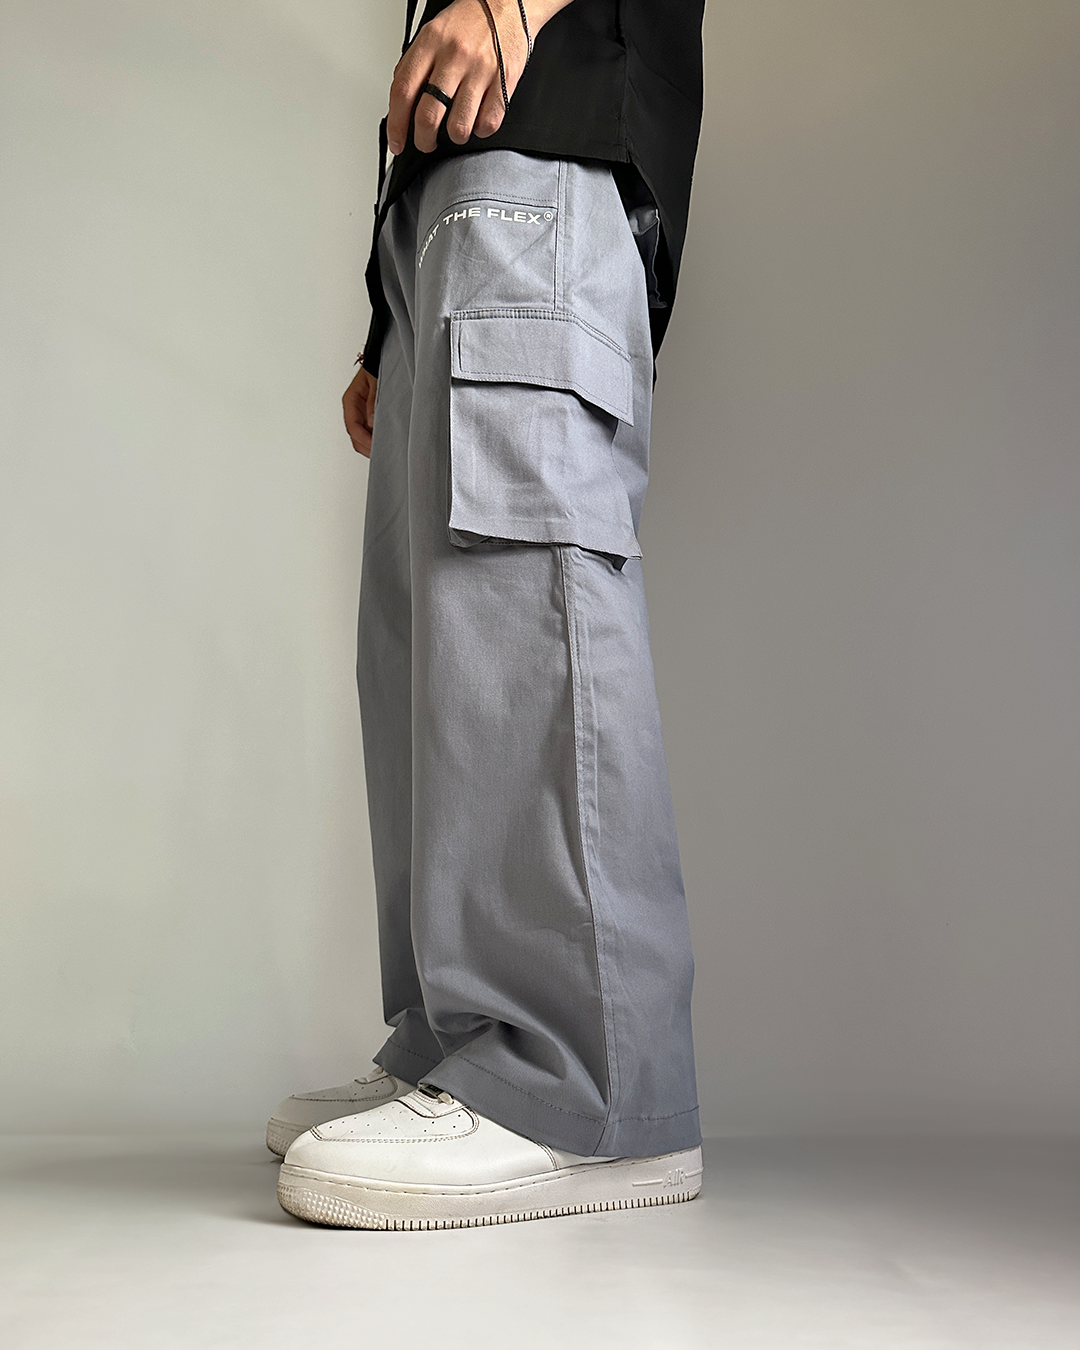 Trendy and Comfy Women's Baggy Cargo Pants - Perfect for a Relaxed